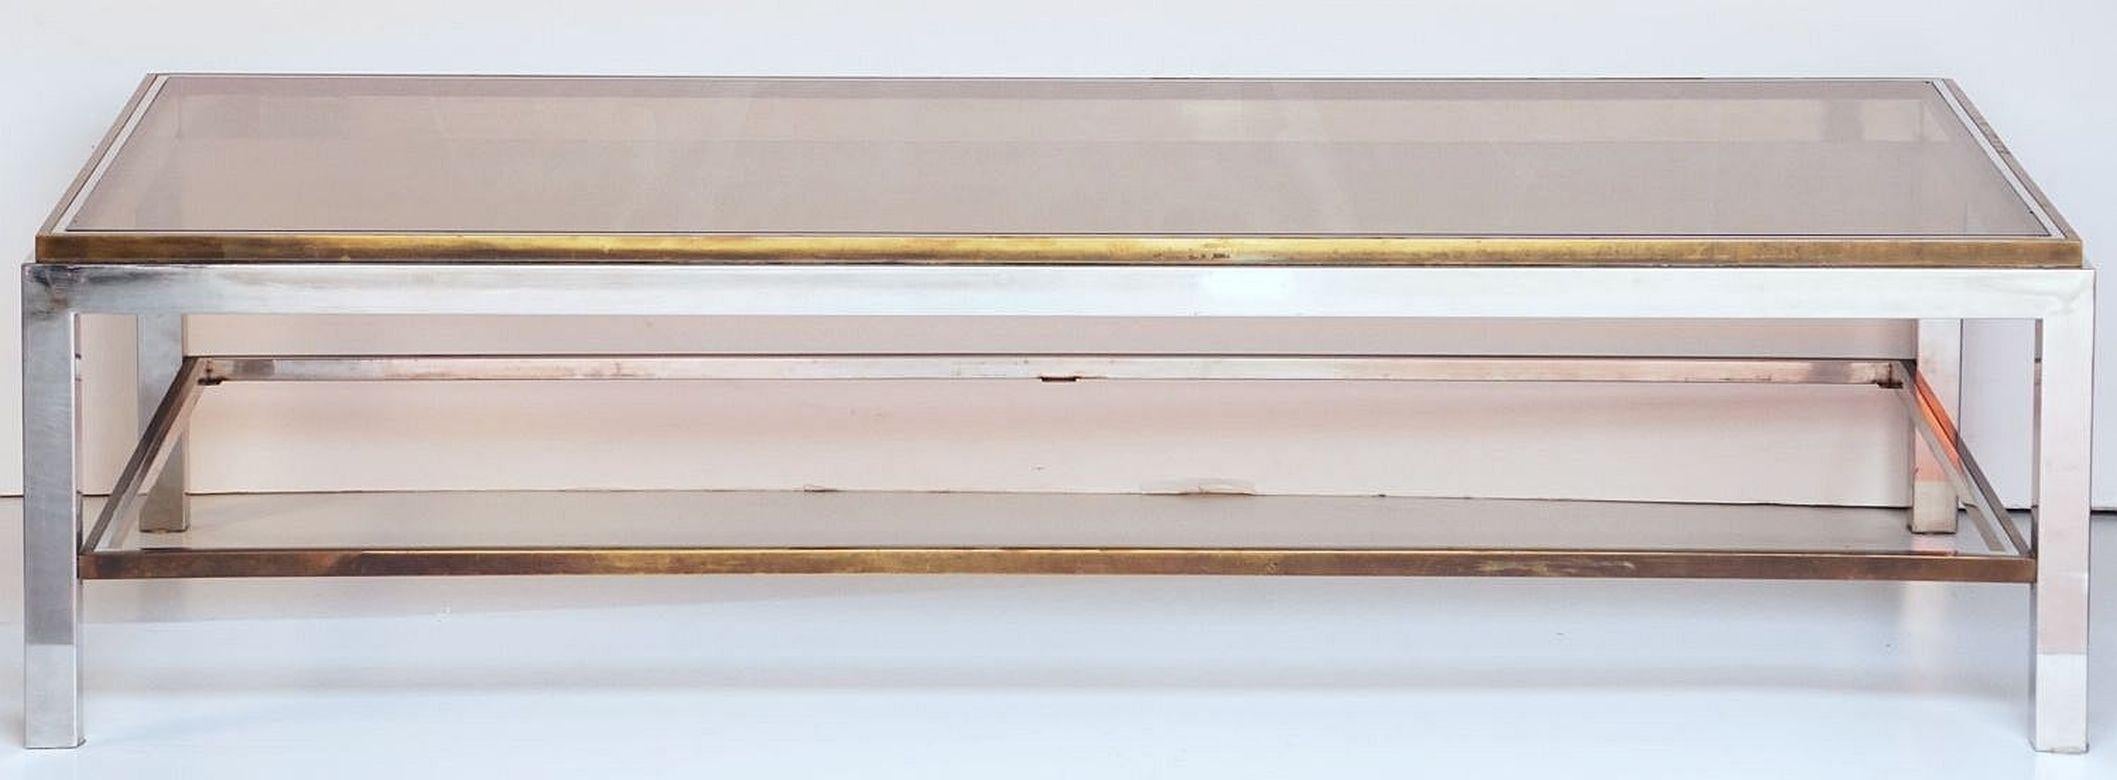 Large Italian Modernist Low Cocktail or Coffee Table of Chrome and Brass  For Sale 8